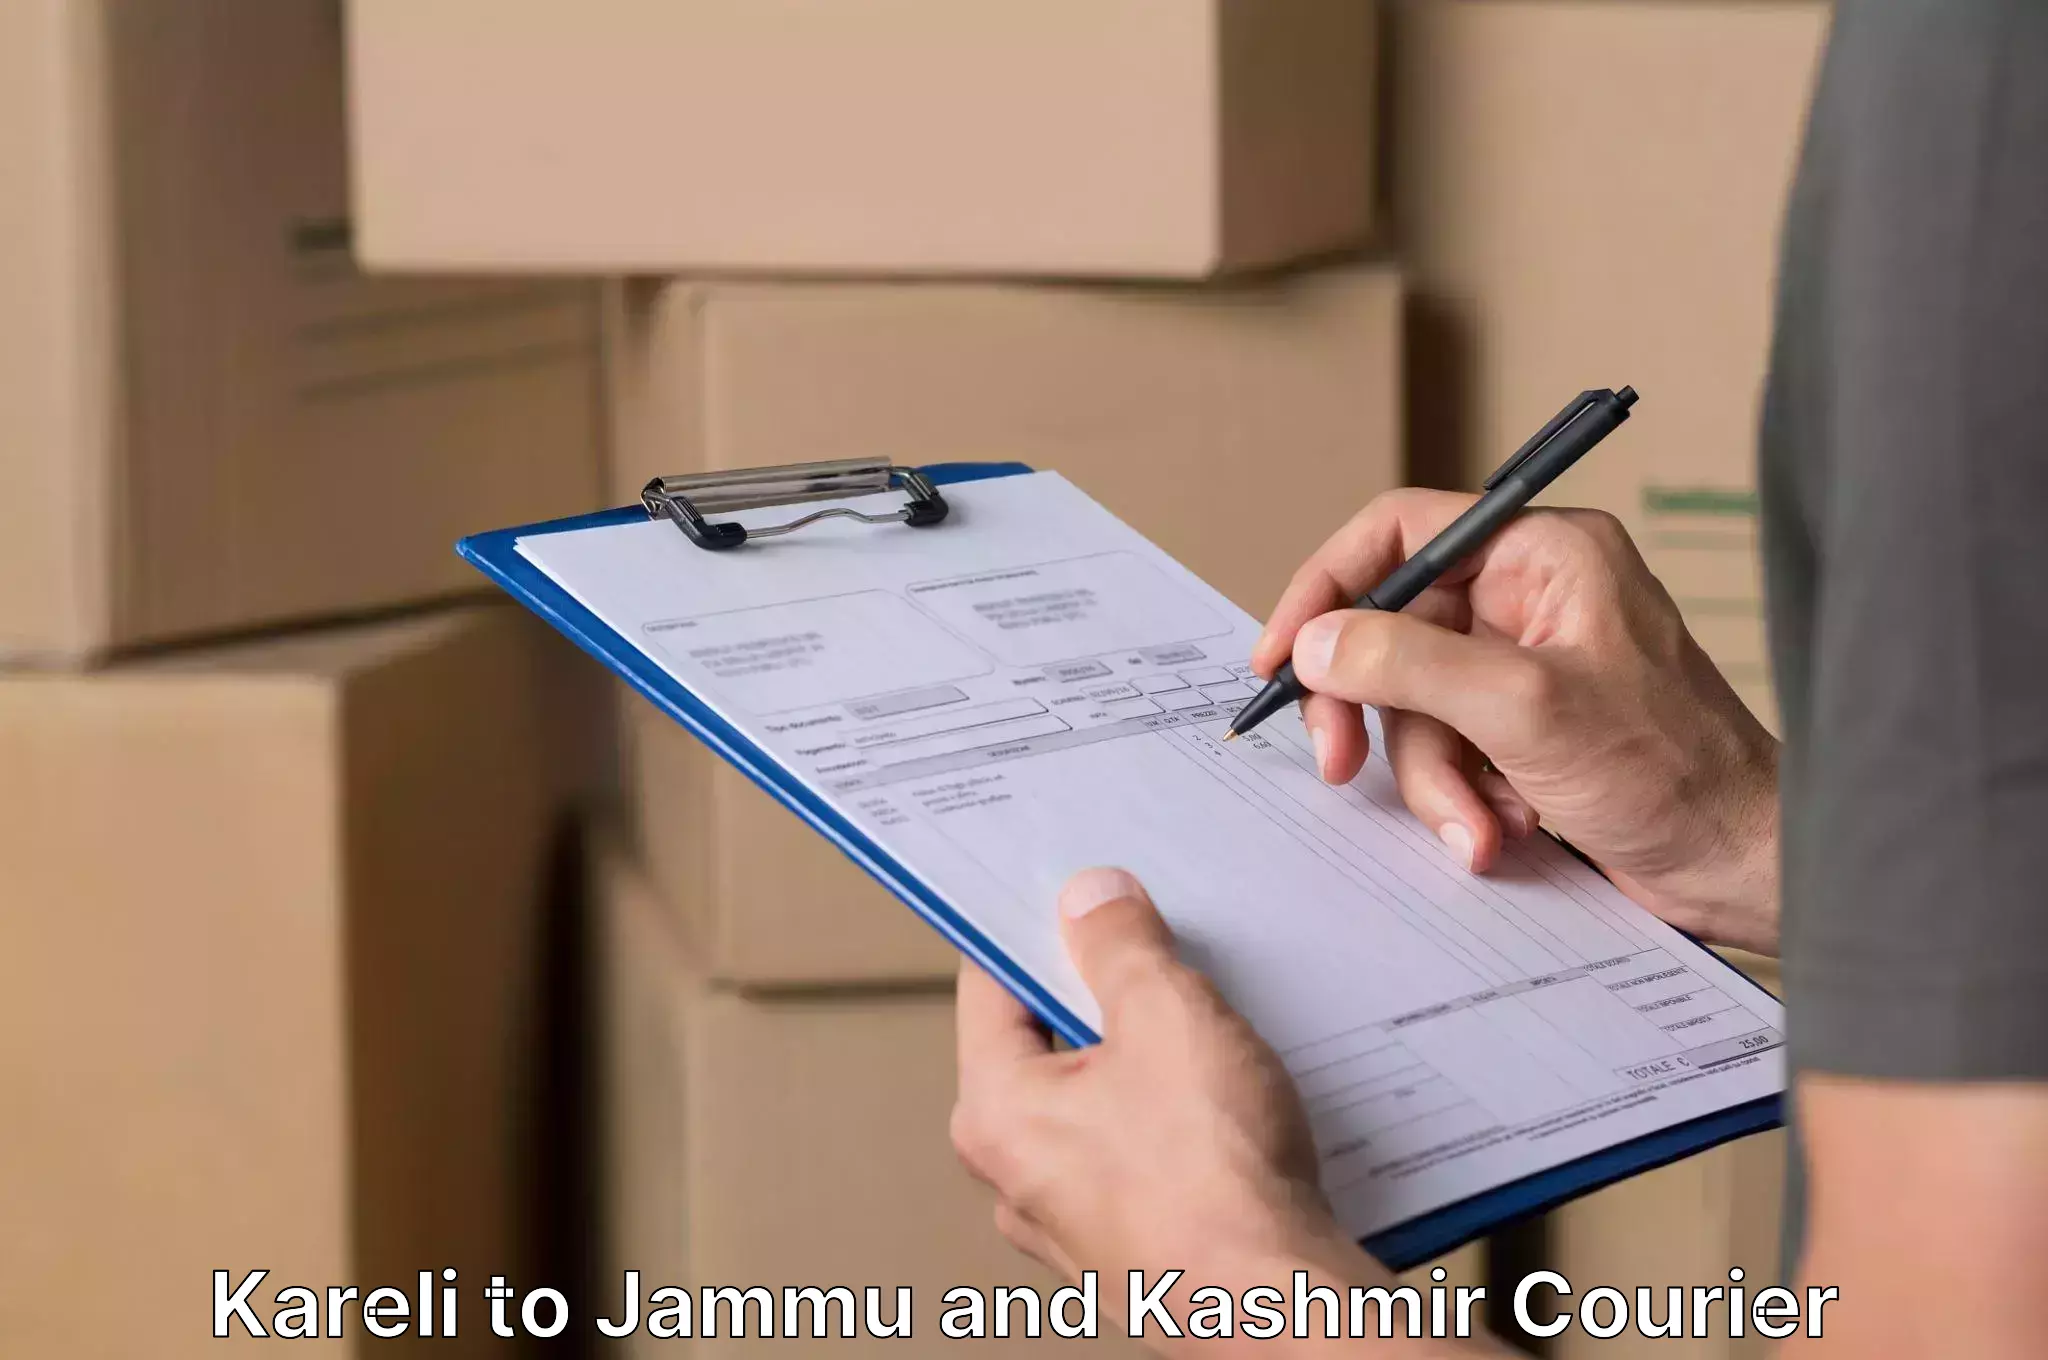 Furniture shipping services in Kareli to Jammu and Kashmir